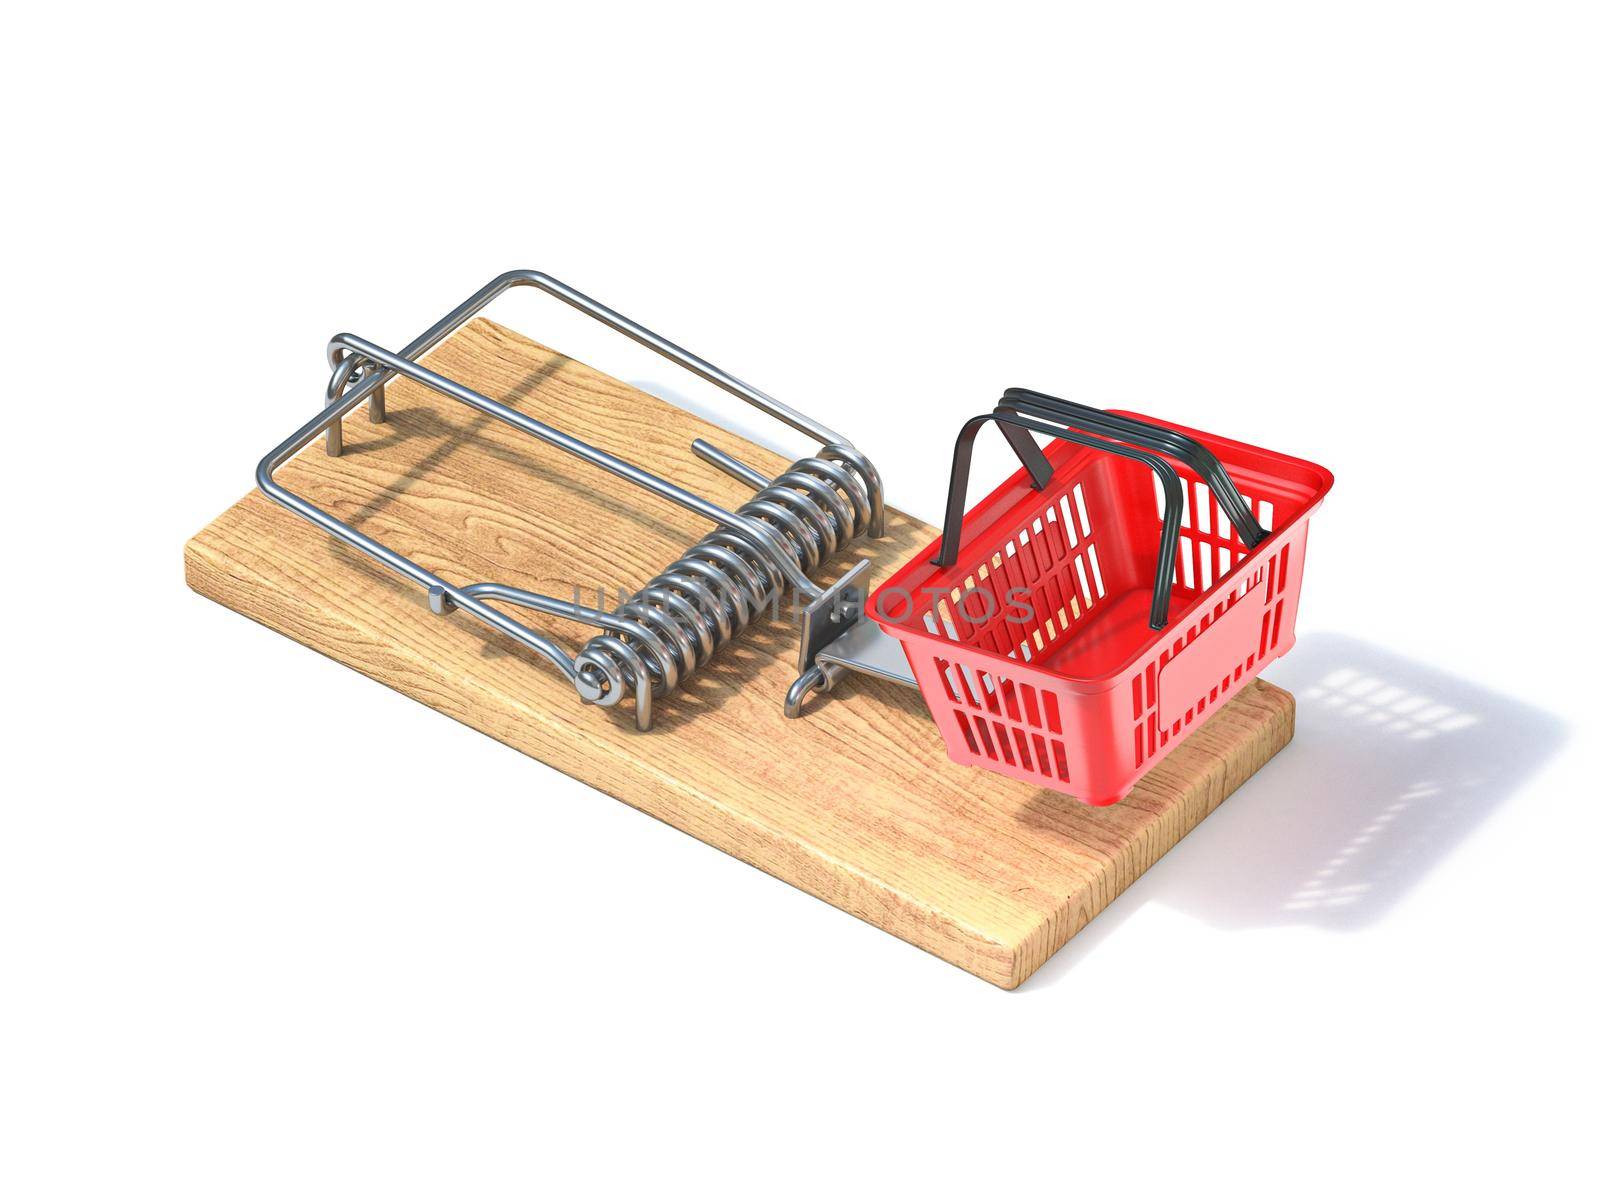 Mousetrap with shopping basket 3D by djmilic